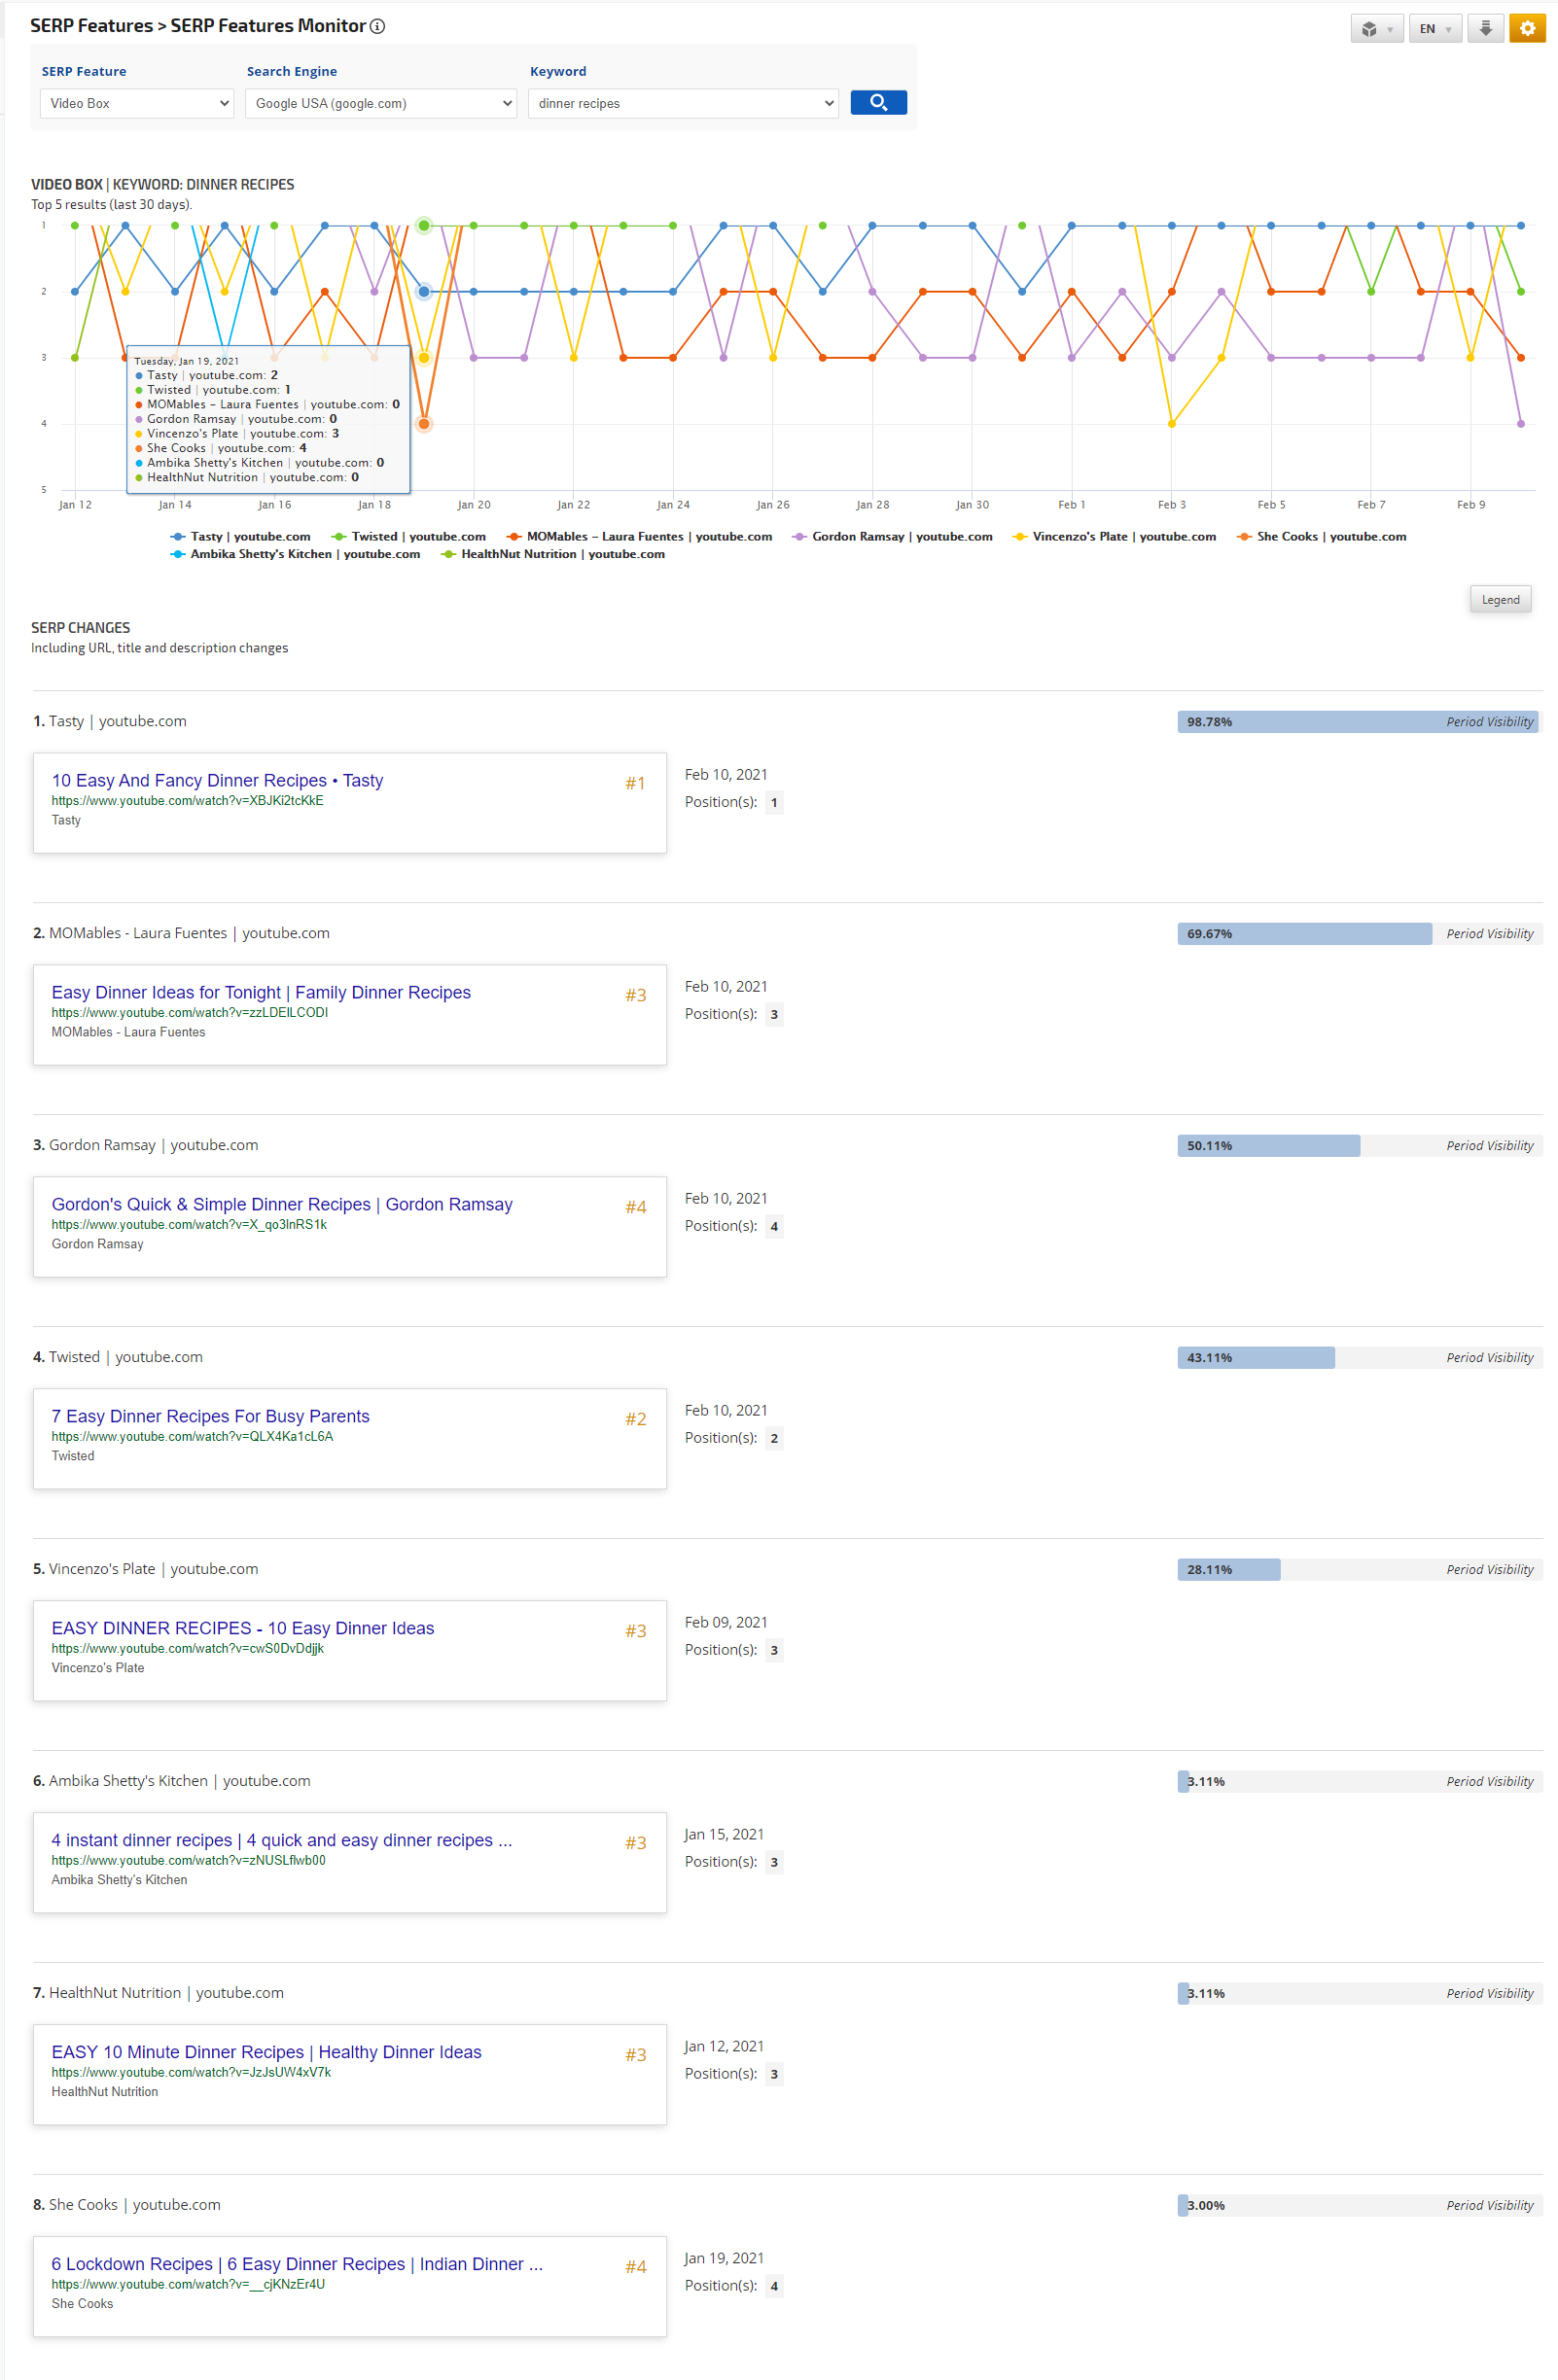 SERP Feature Competitive Analysis